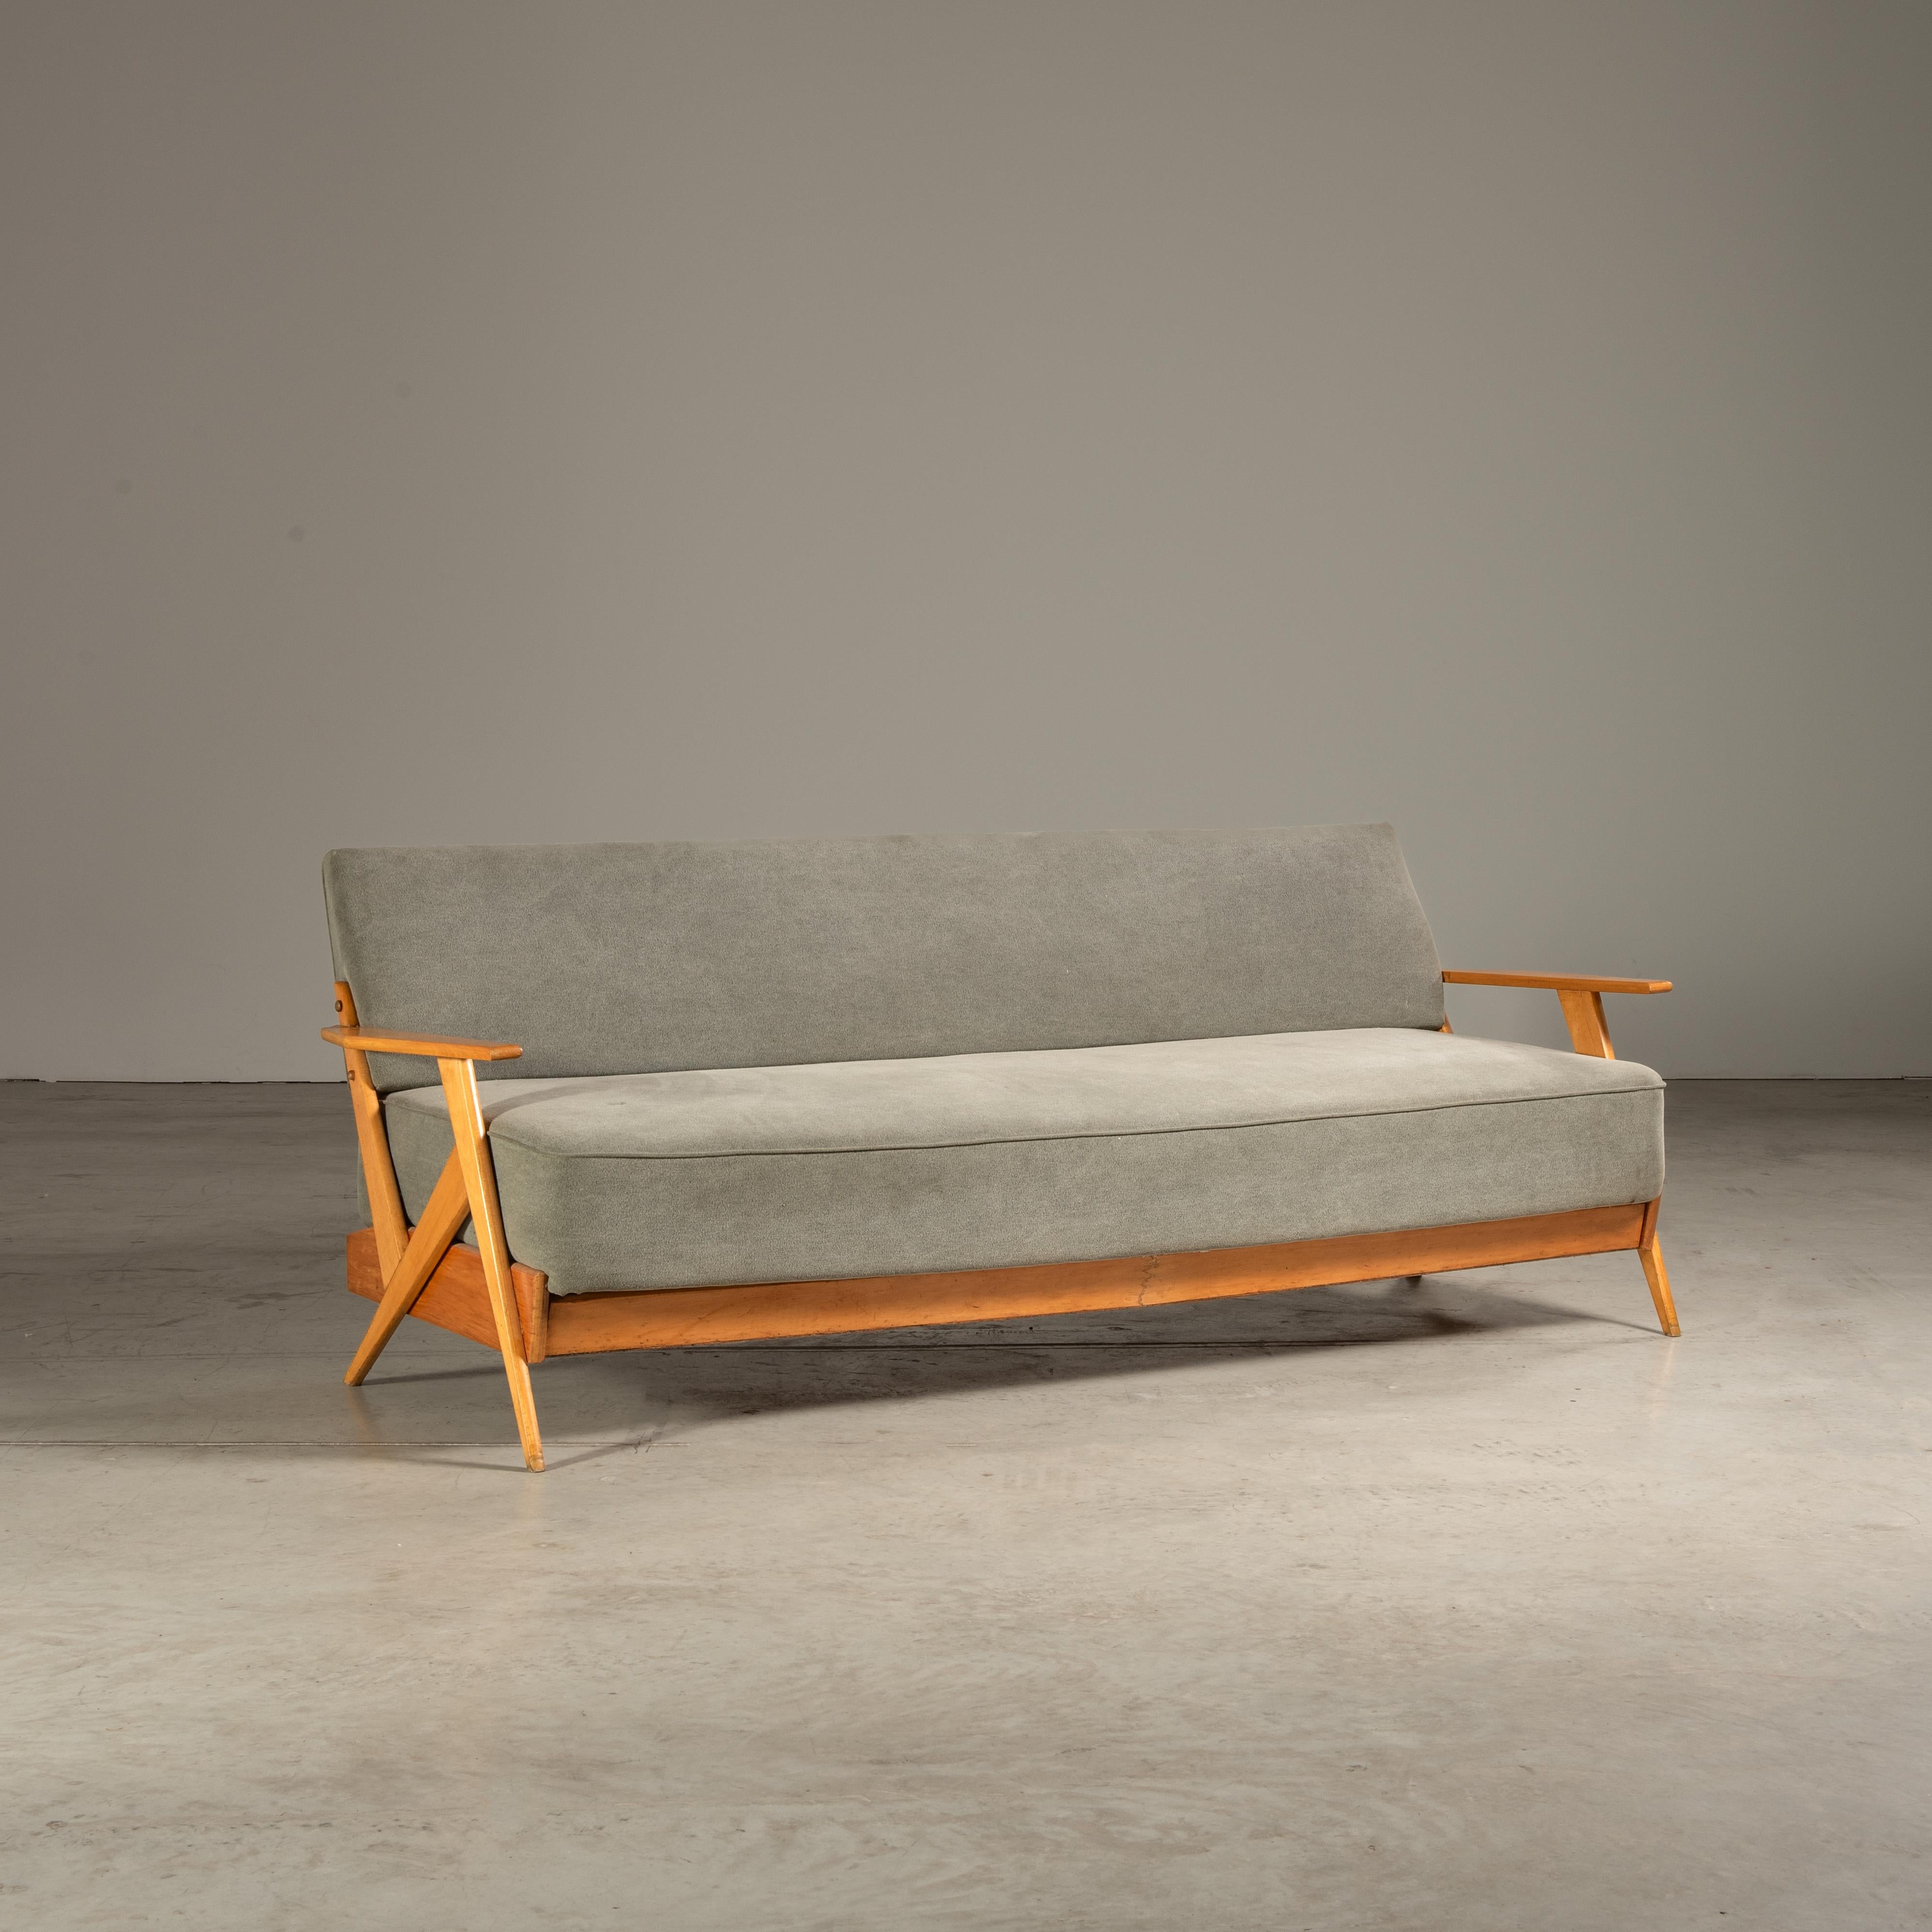 The sofa designed by H. Schnicker for Móveis Artísticos Z is a masterful representation of Brazilian mid-century modern design, seamlessly blending contemporary sensibilities with the era's characteristic warmth and structural clarity. Crafted from